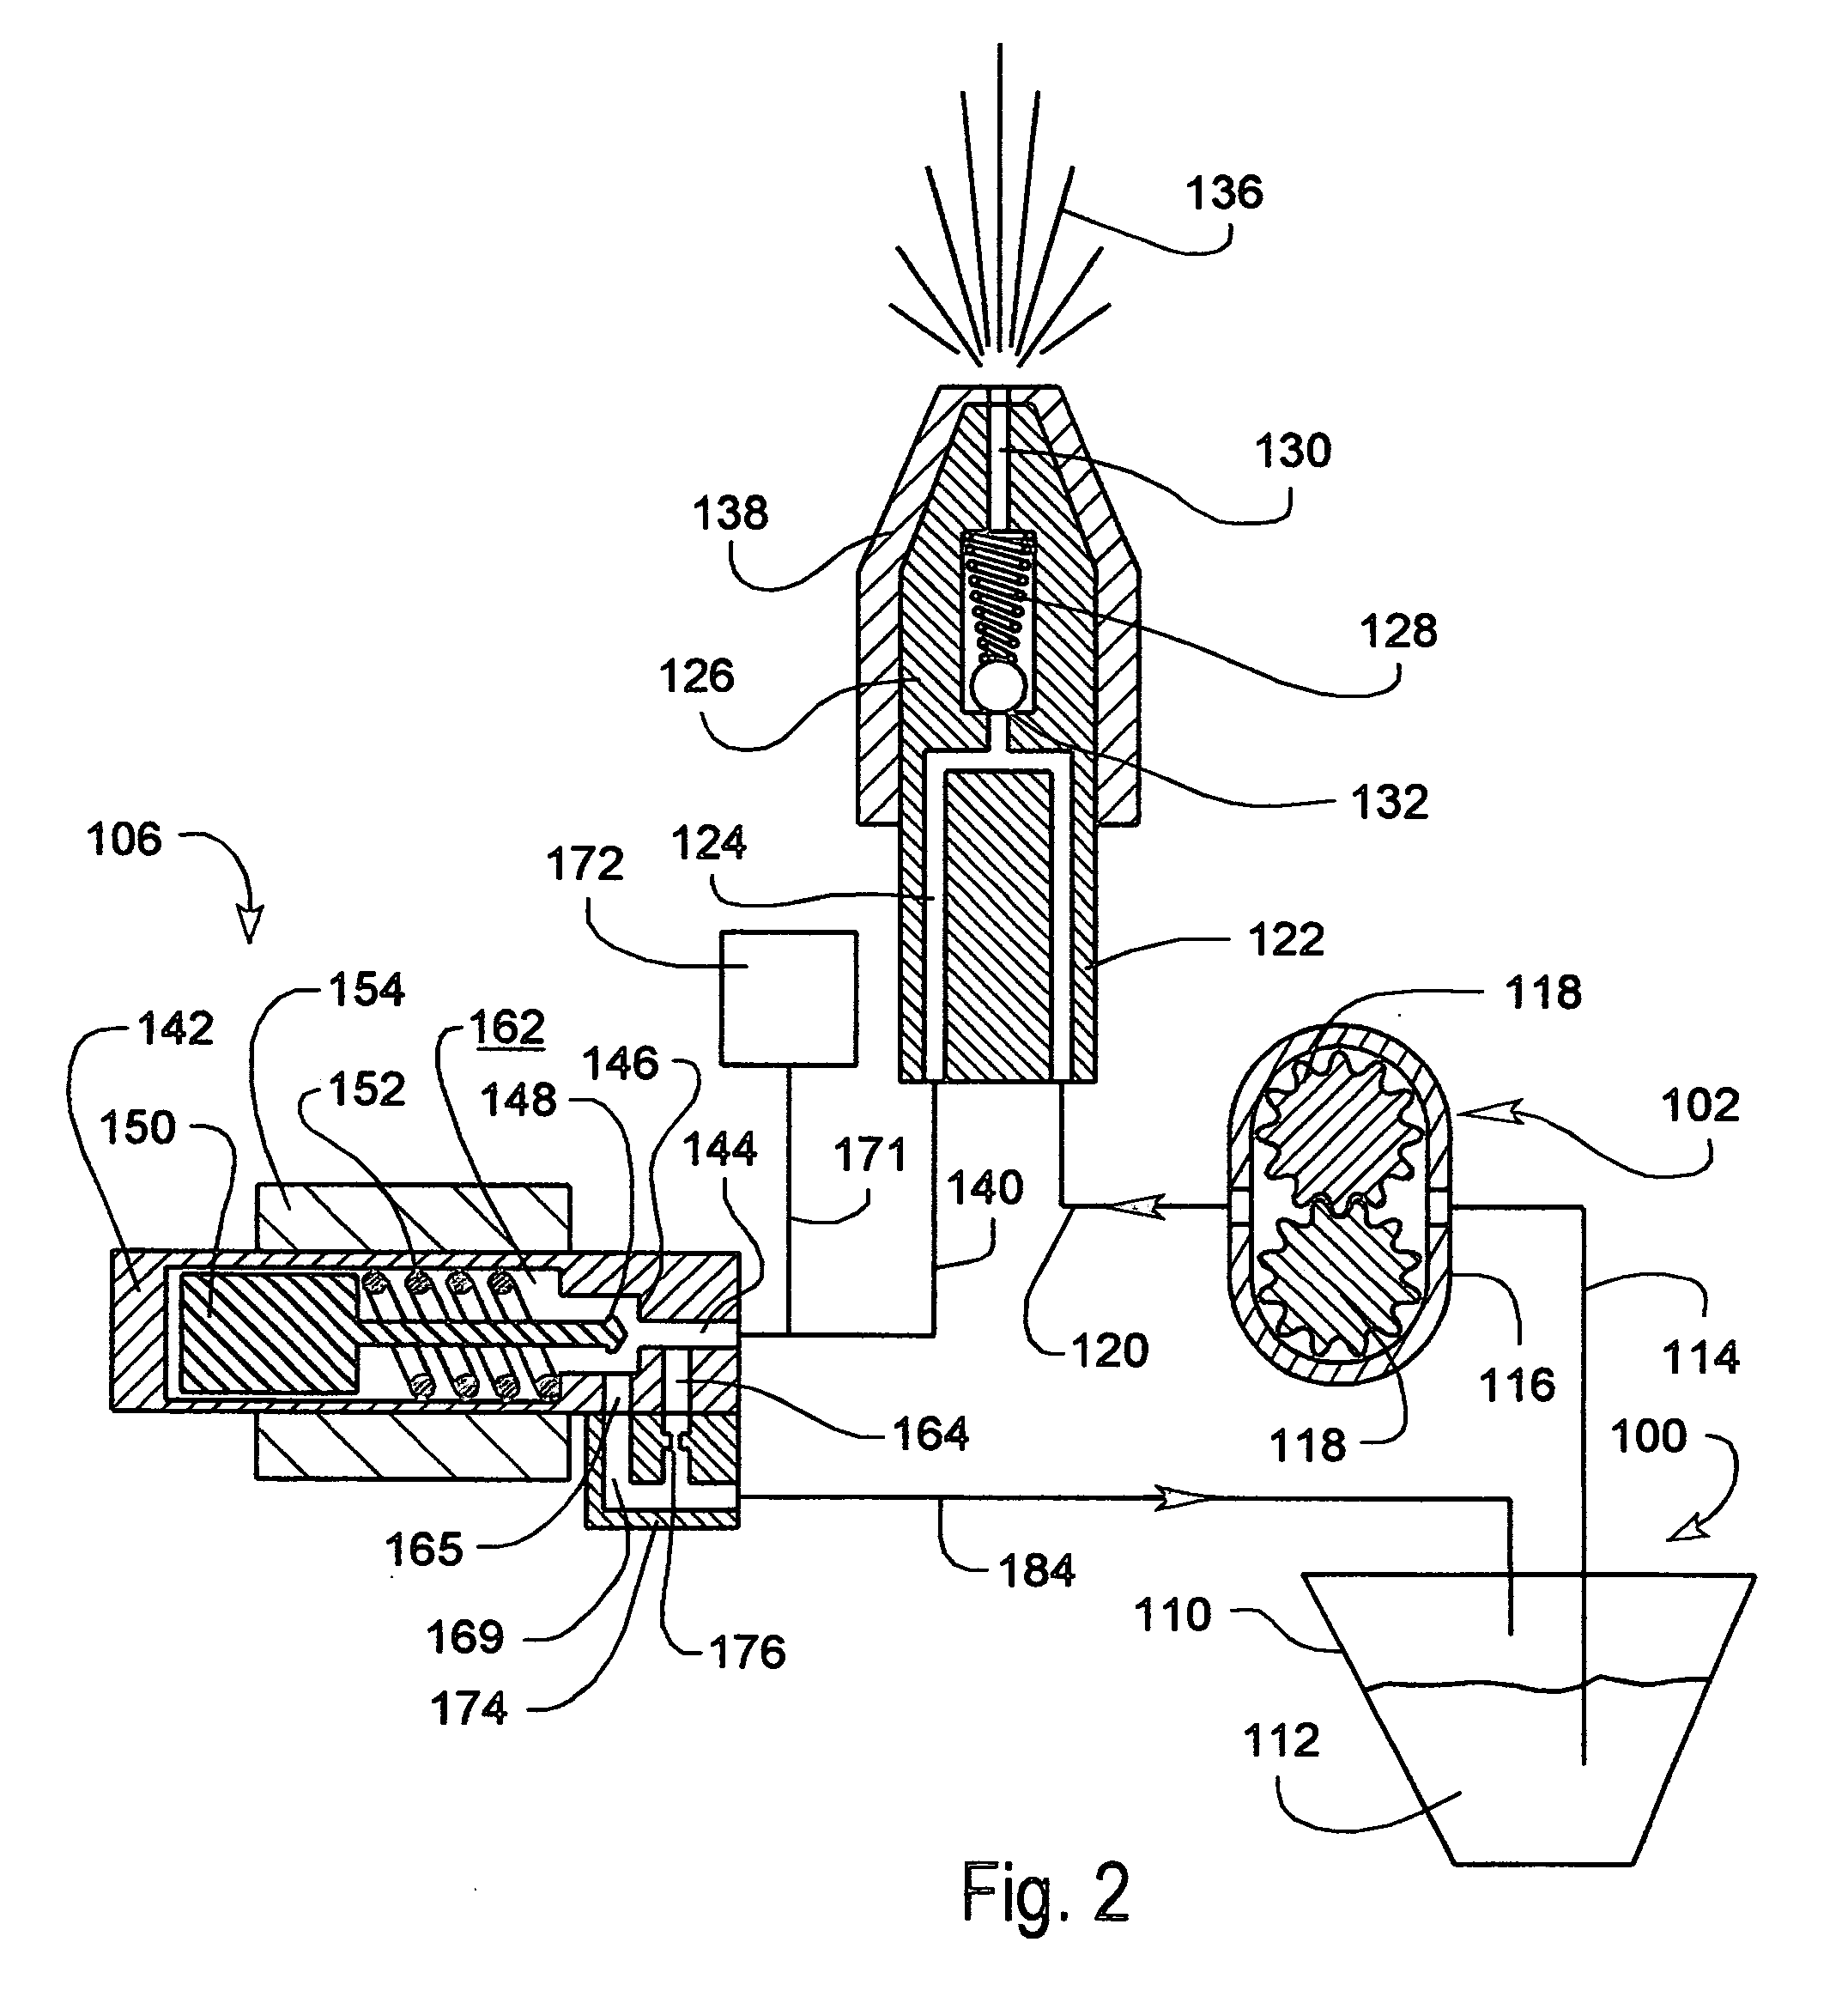 Pulsed spray system of reduced power consumption